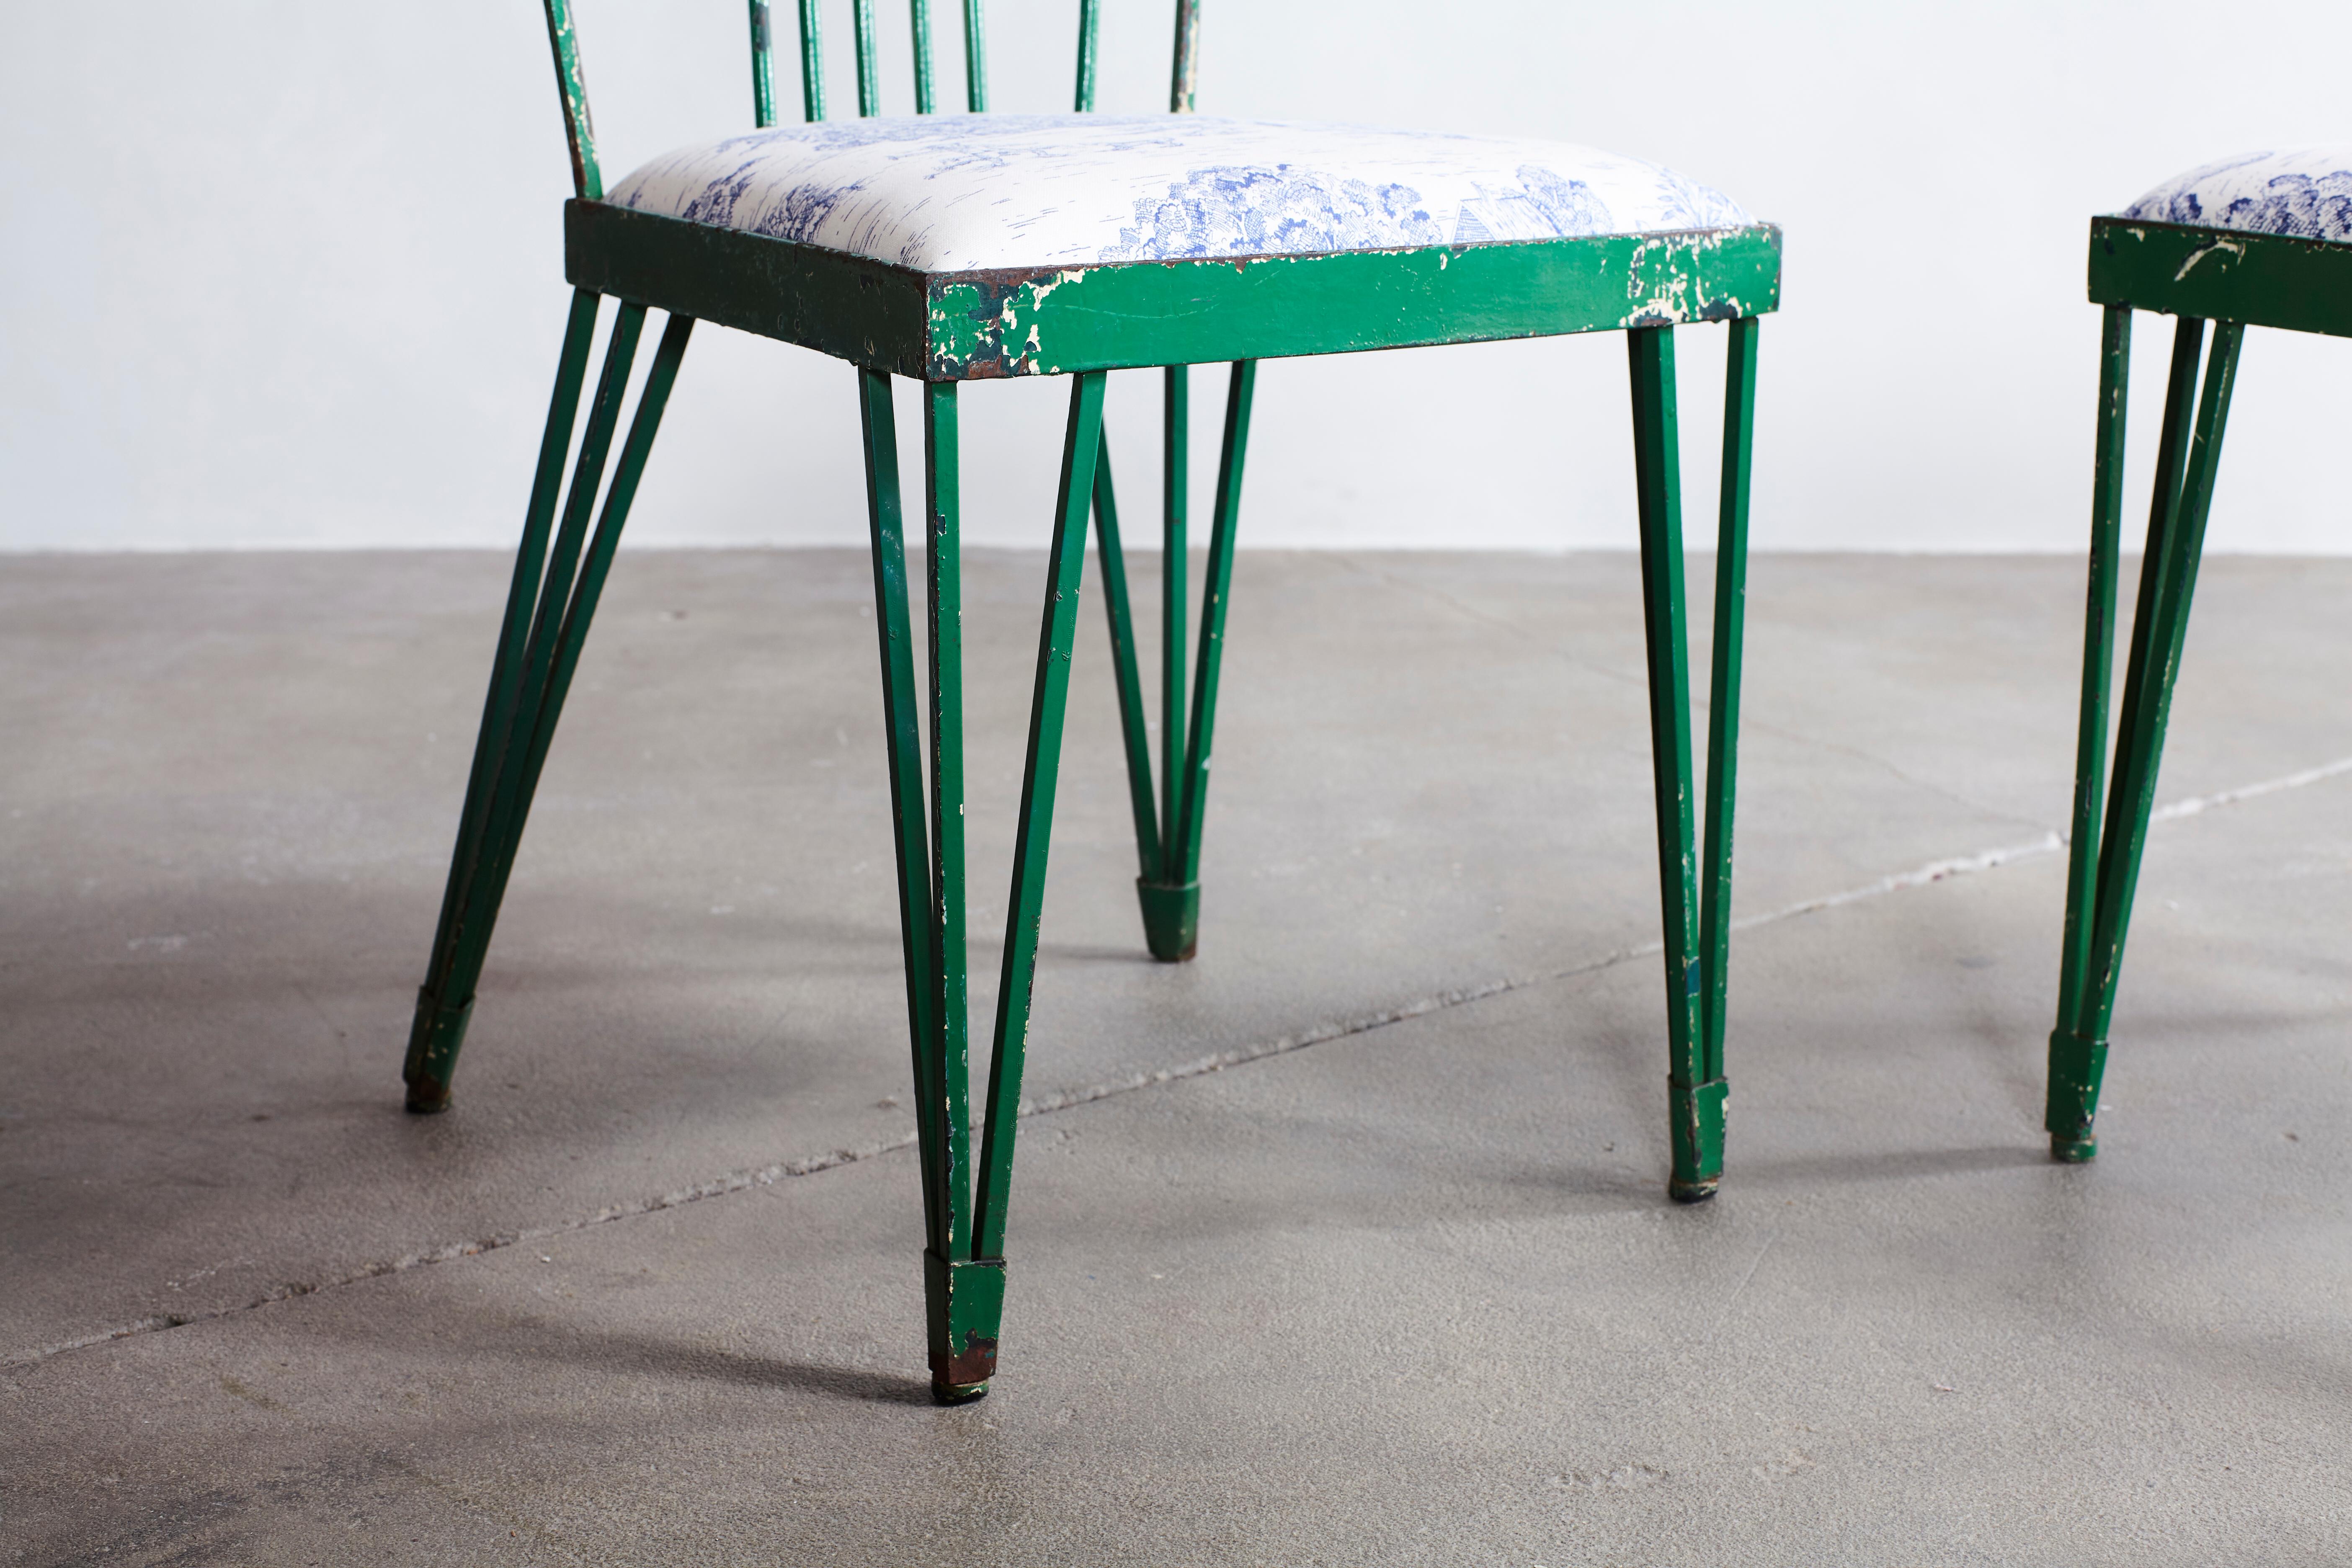 Set of four green metal modernist chairs newly upholstered in blue and white toile fabric.